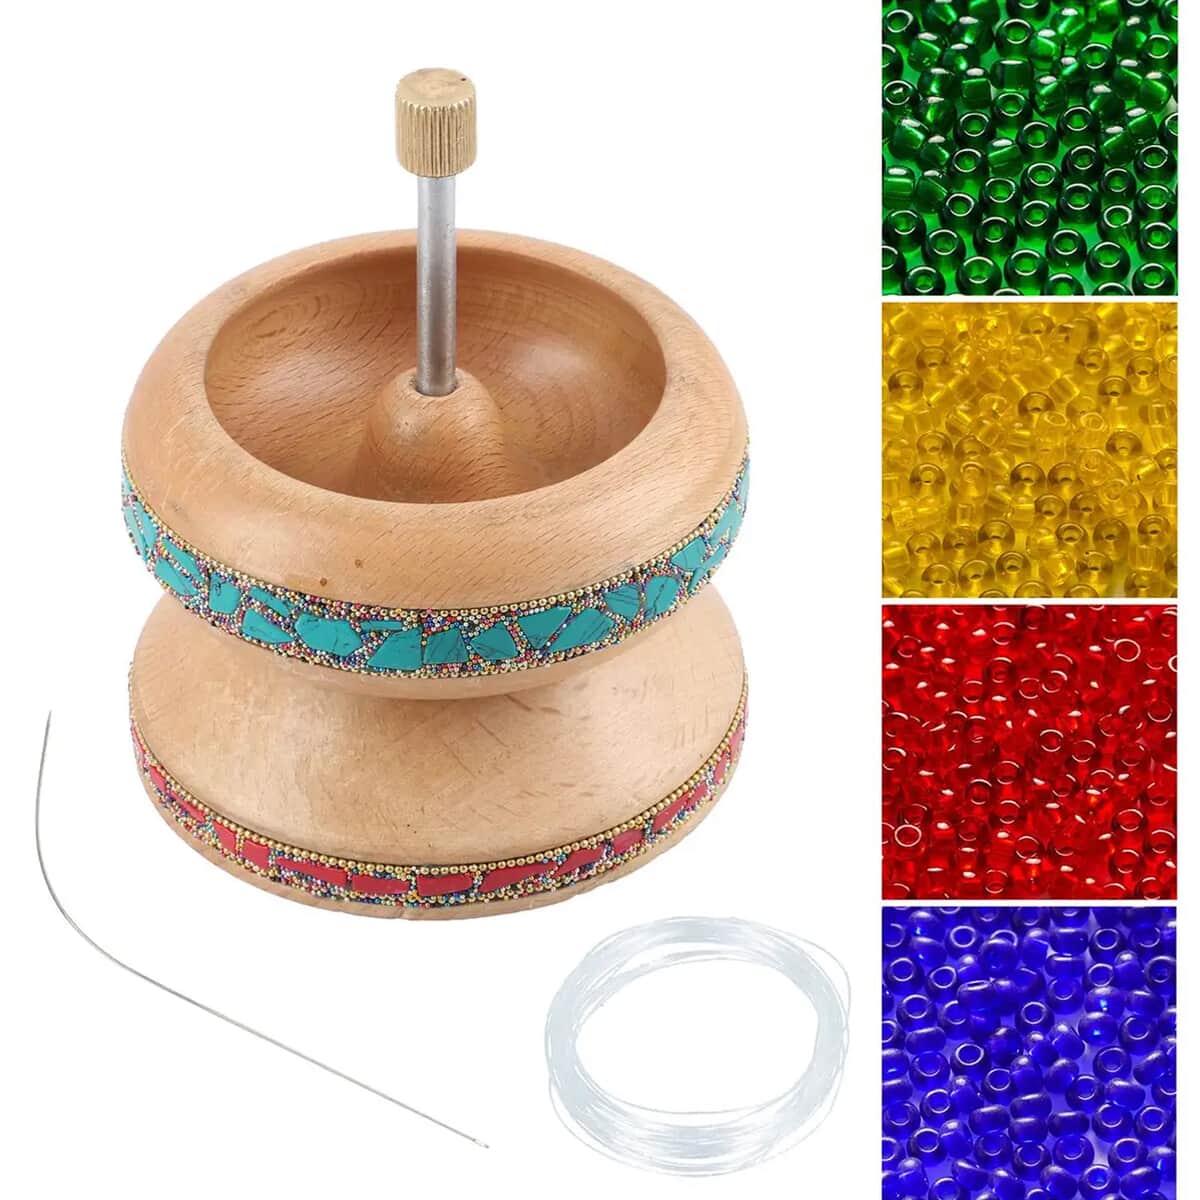  Shop LC White Color Seed Bead Spinner with Big Eye